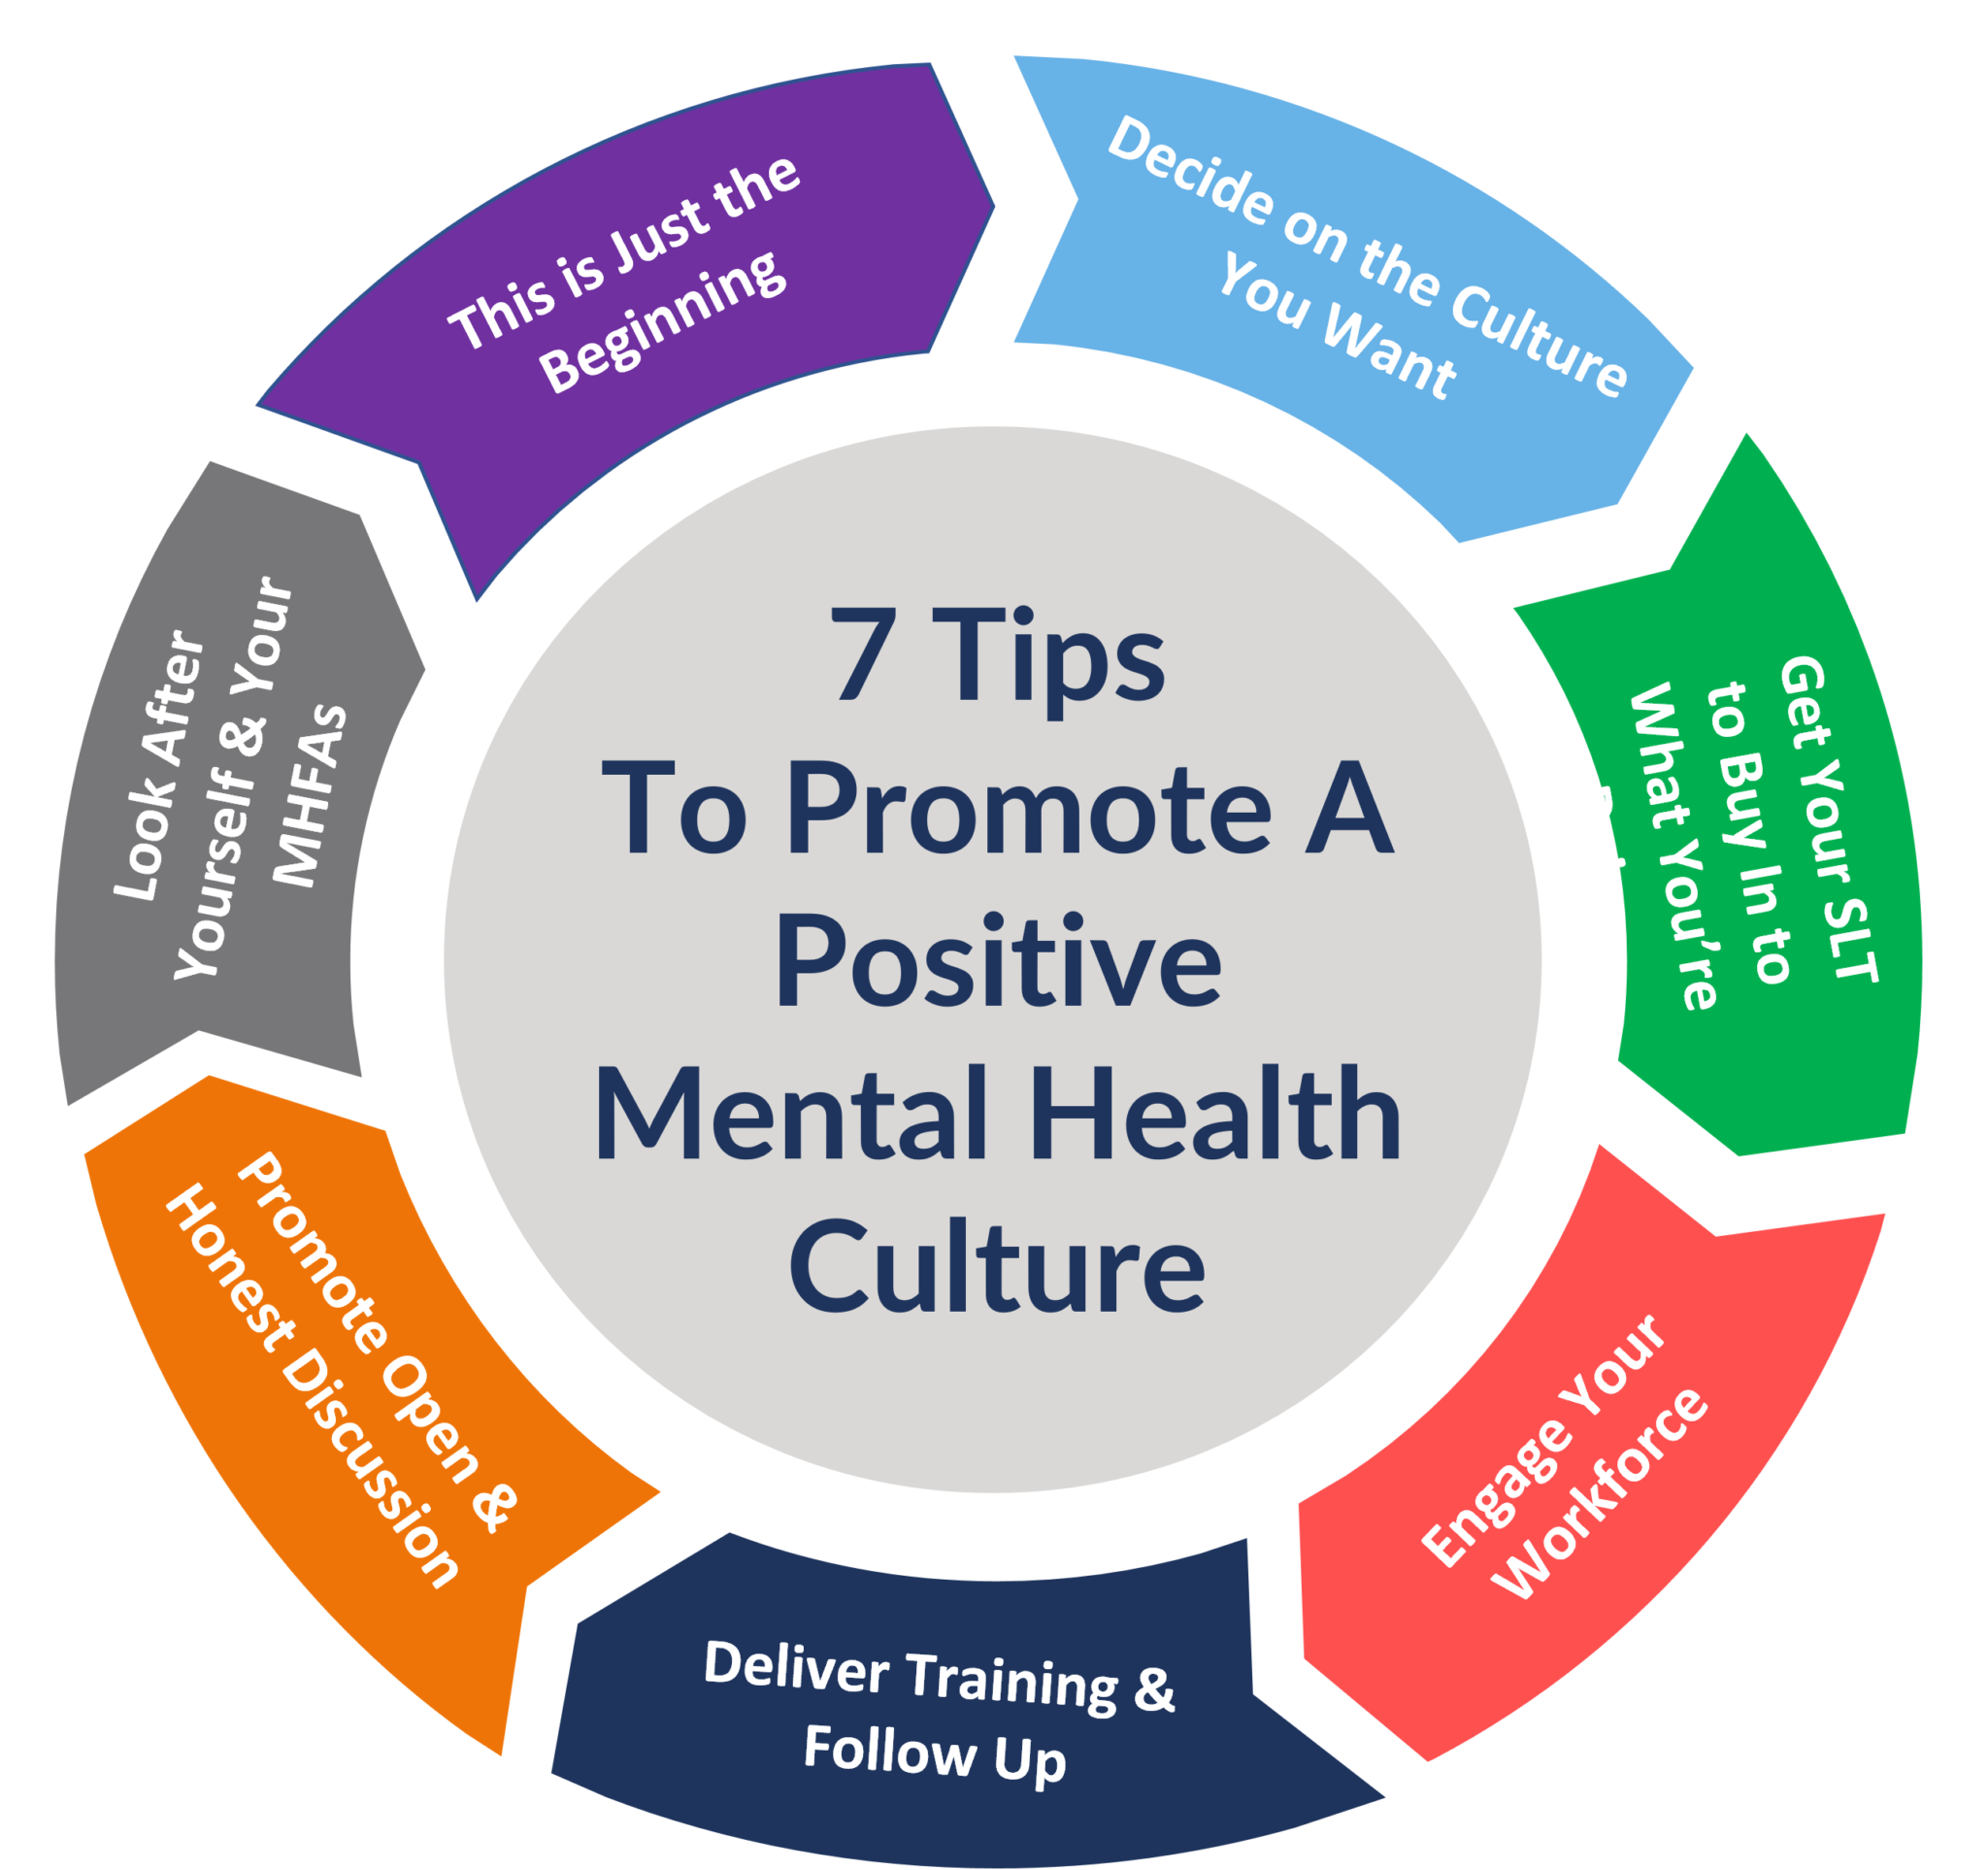 7 Tips To Promote A Positive Mental Health Culture 3b Training